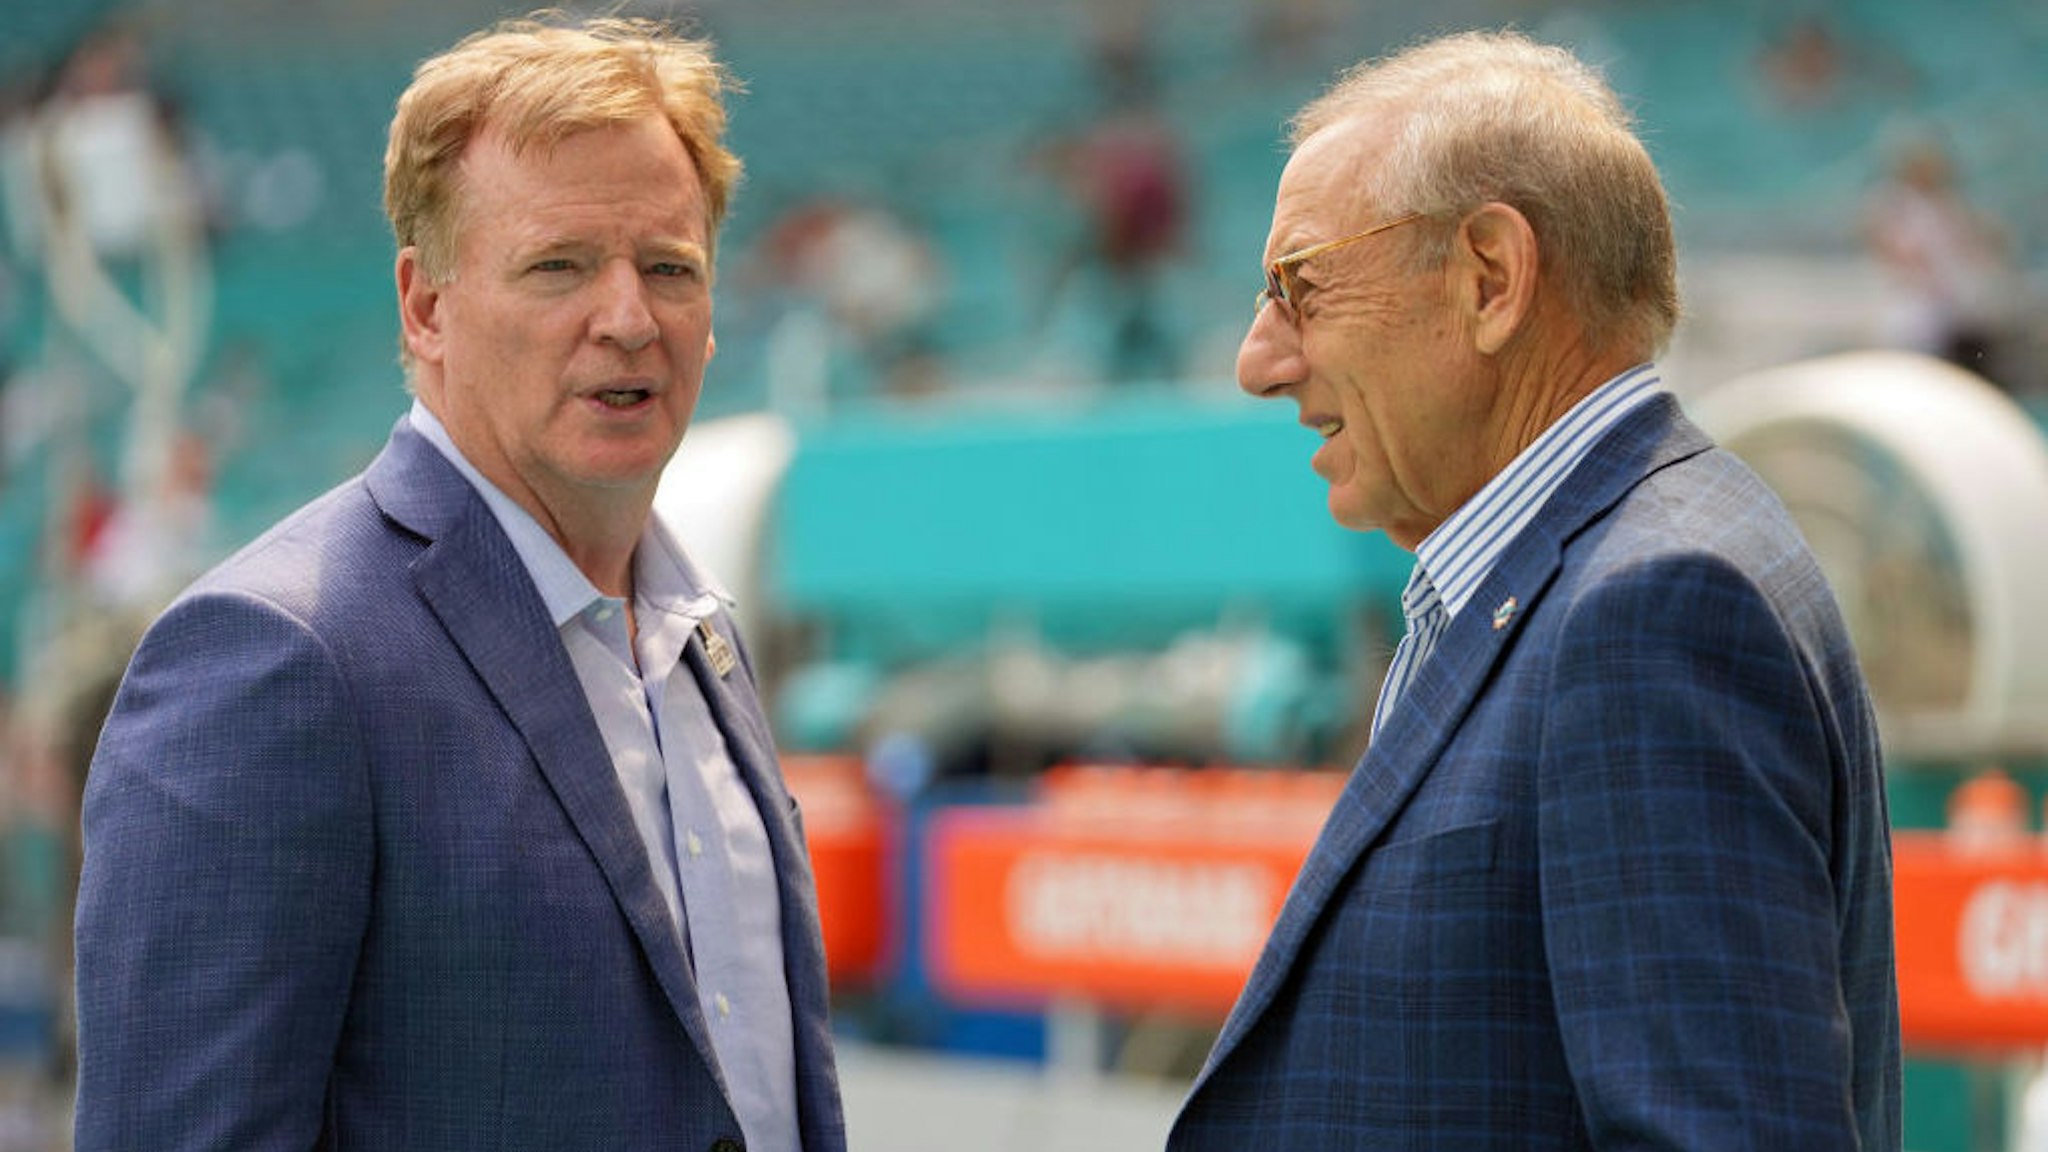 MIAMI GARDENS, FLORIDA - OCTOBER 03: NFL Commissioner Roger Goodell speaks with Miami Dolphins owner Stephen Ross before the game against the Indianapolis Colts and the Miami Dolphins at Hard Rock Stadium on October 03, 2021 in Miami Gardens, Florida. (Photo by Mark Brown/Getty Images)